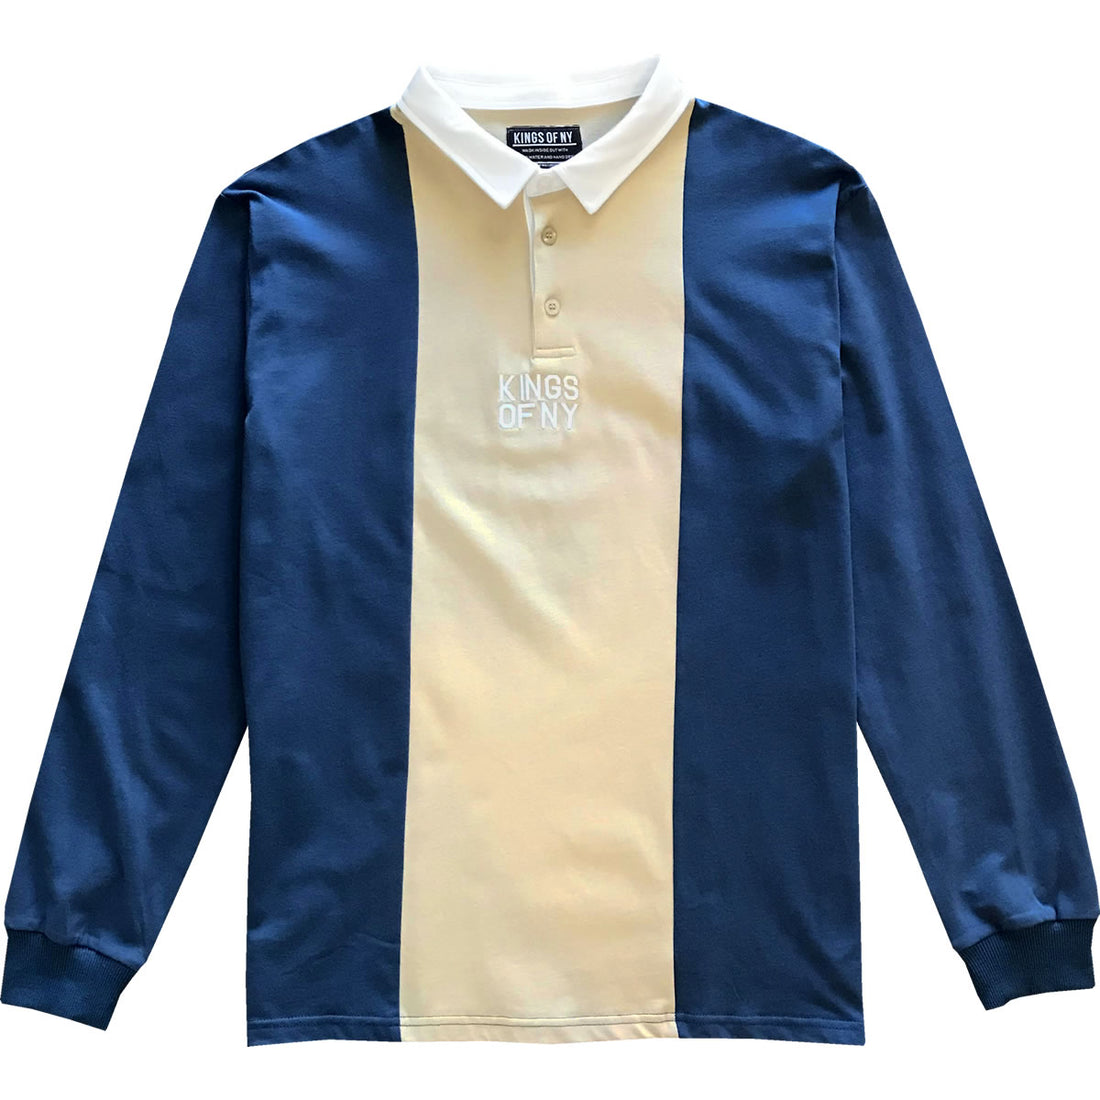 Dusty Blue and Tan Logo Vertical Striped Long Sleeve Rugby Shirt